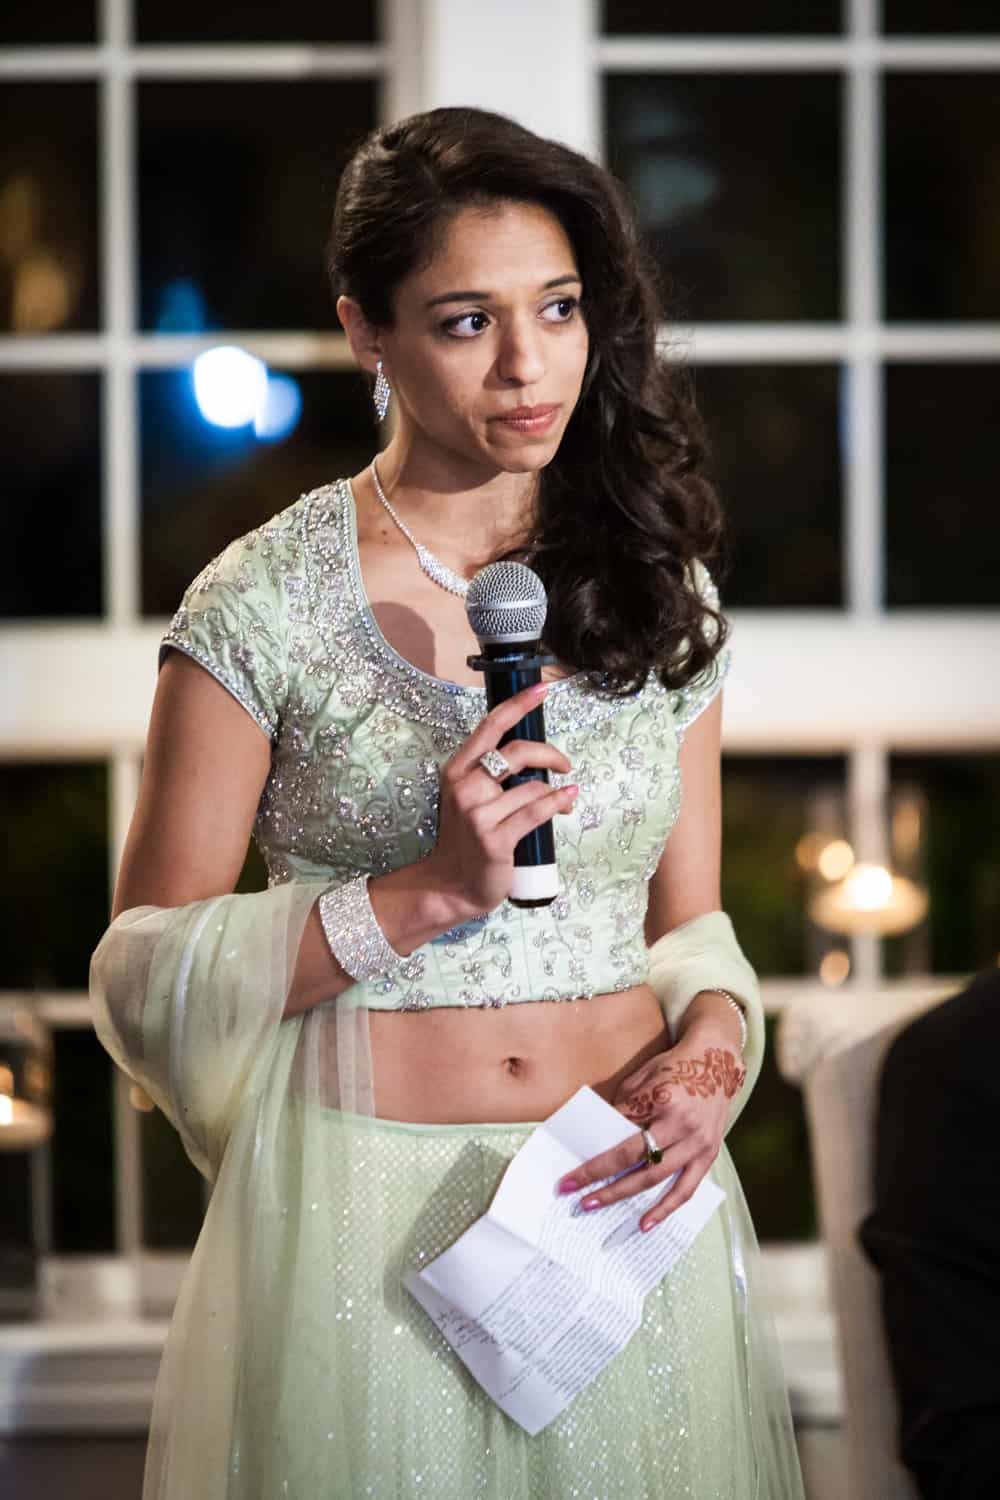 Maid of honor making speech in Indian traditional sari at an East Wind Inn wedding reception